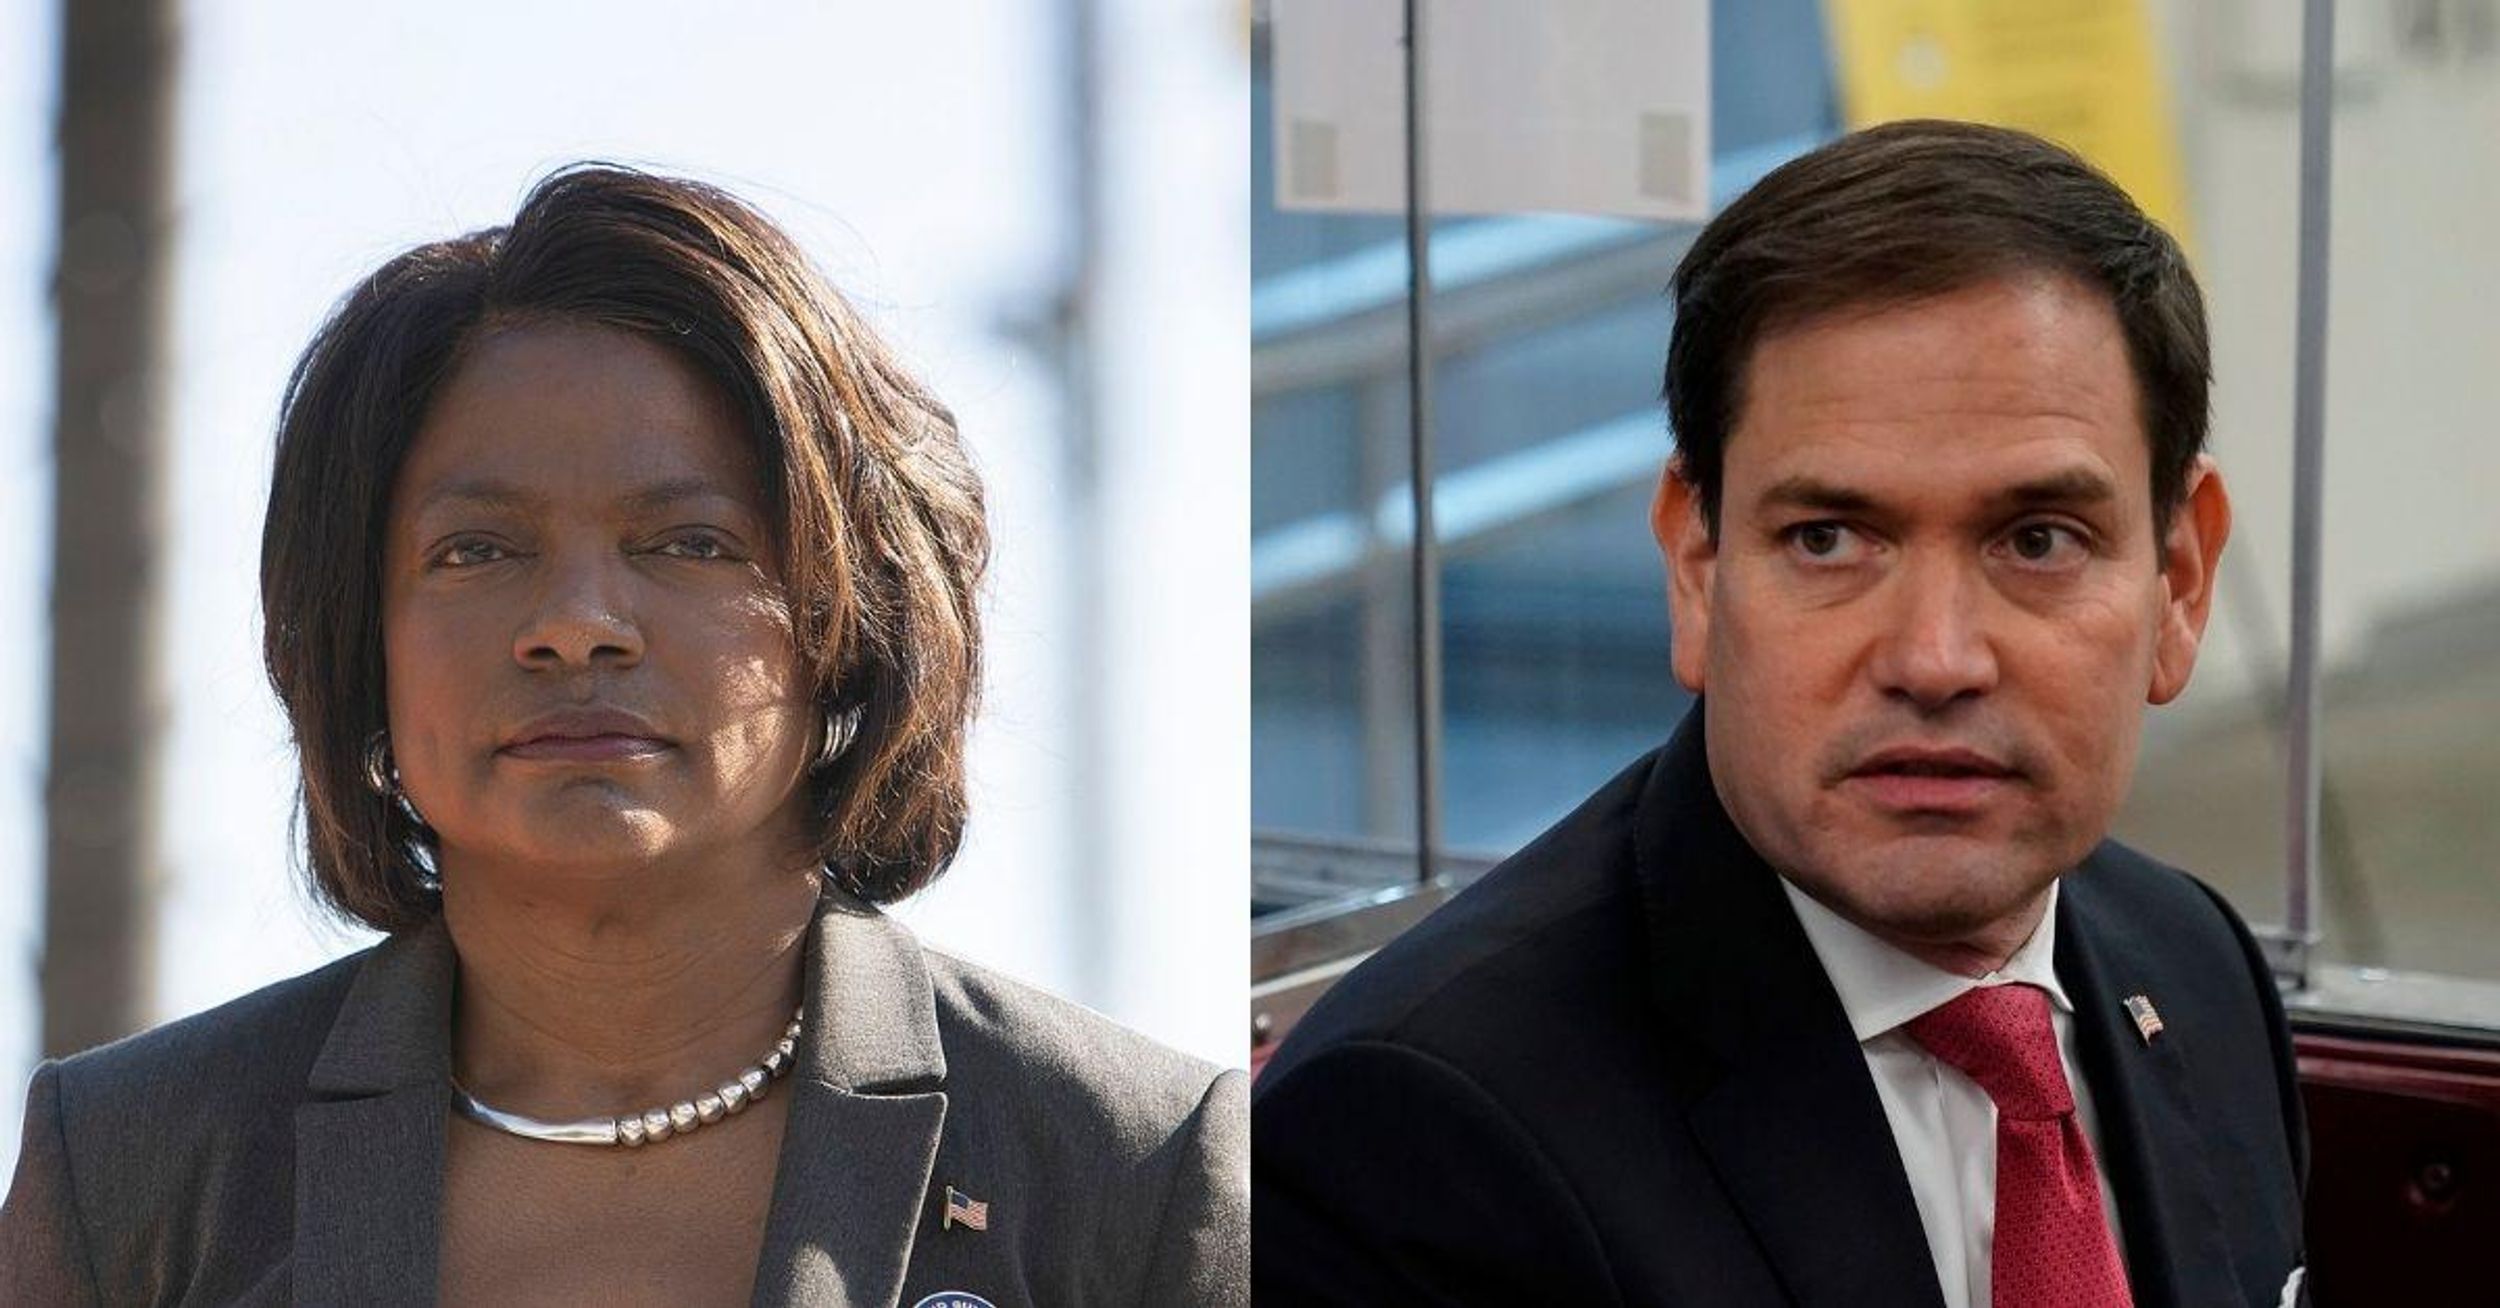 Former Police Chief-Turned-Dem Rep. Rips Marco Rubio For Claiming She's Now Anti-Police